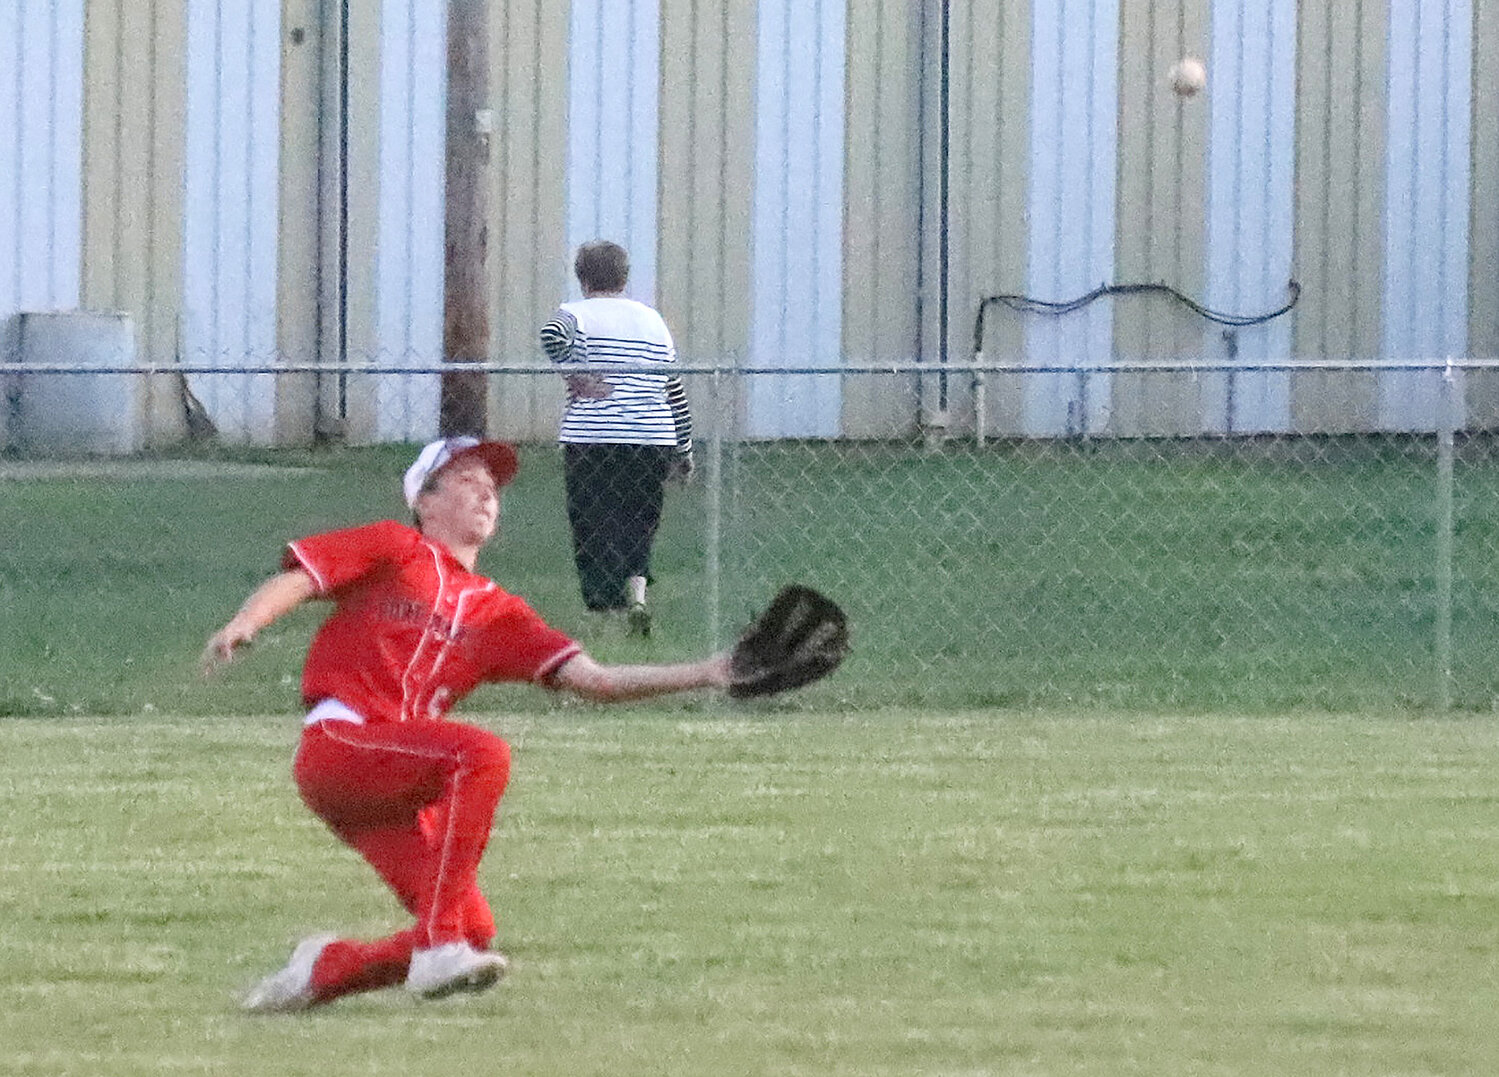 Fort Madison incoming freshman Owen Huffman makes a sliding catch to rob Central Lee's Kayden Calffee of a hit in the top of the 4th inning Monday night in Fort Madison. The Hounds won 2-1 and have moved to 3-0 to start the year.